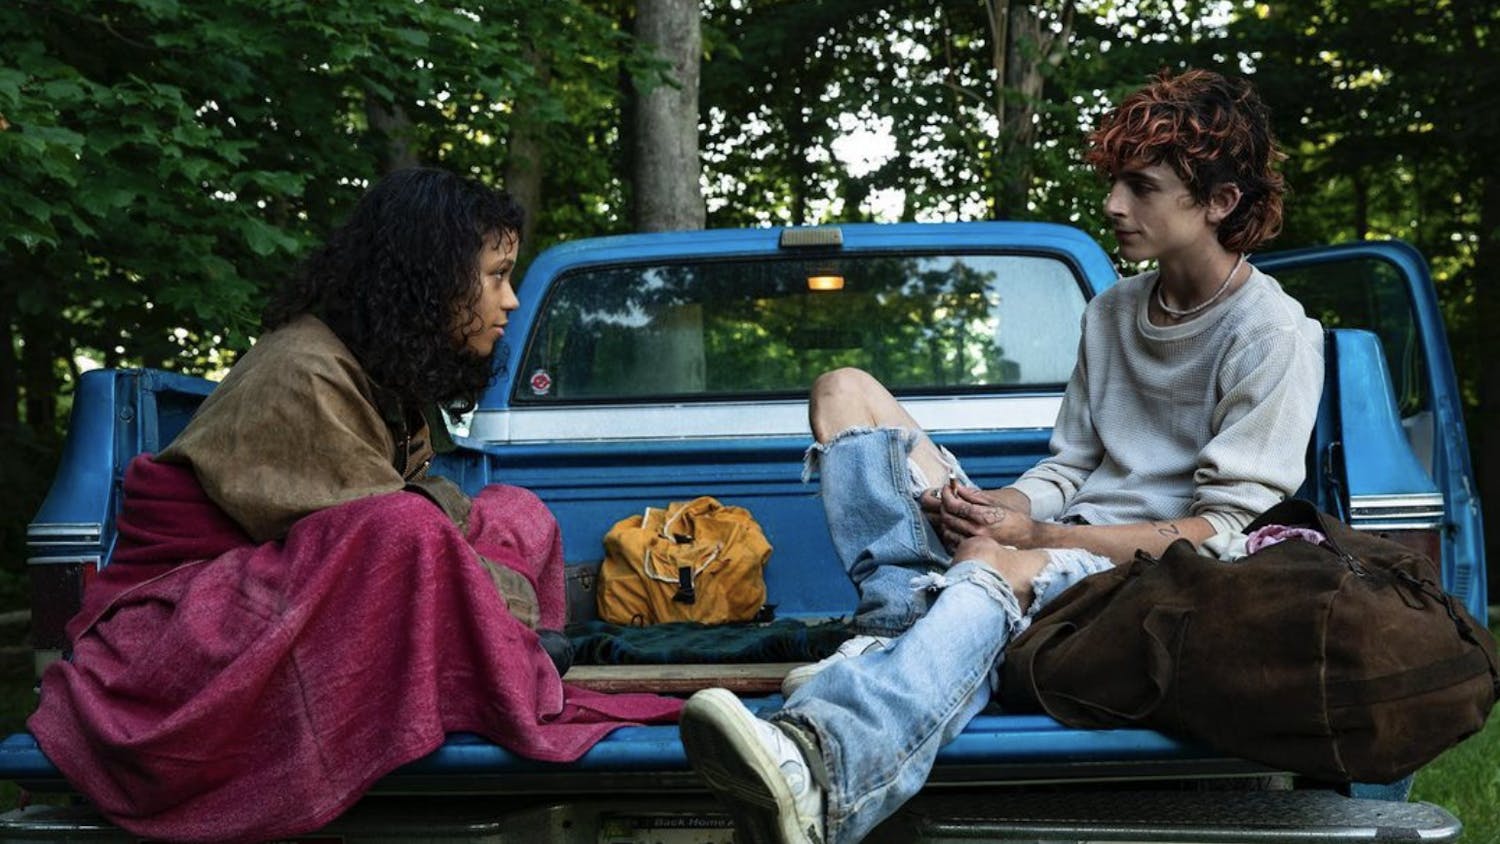 Everything to know about Timothée Chalamet’s new movie, “Bones & All”